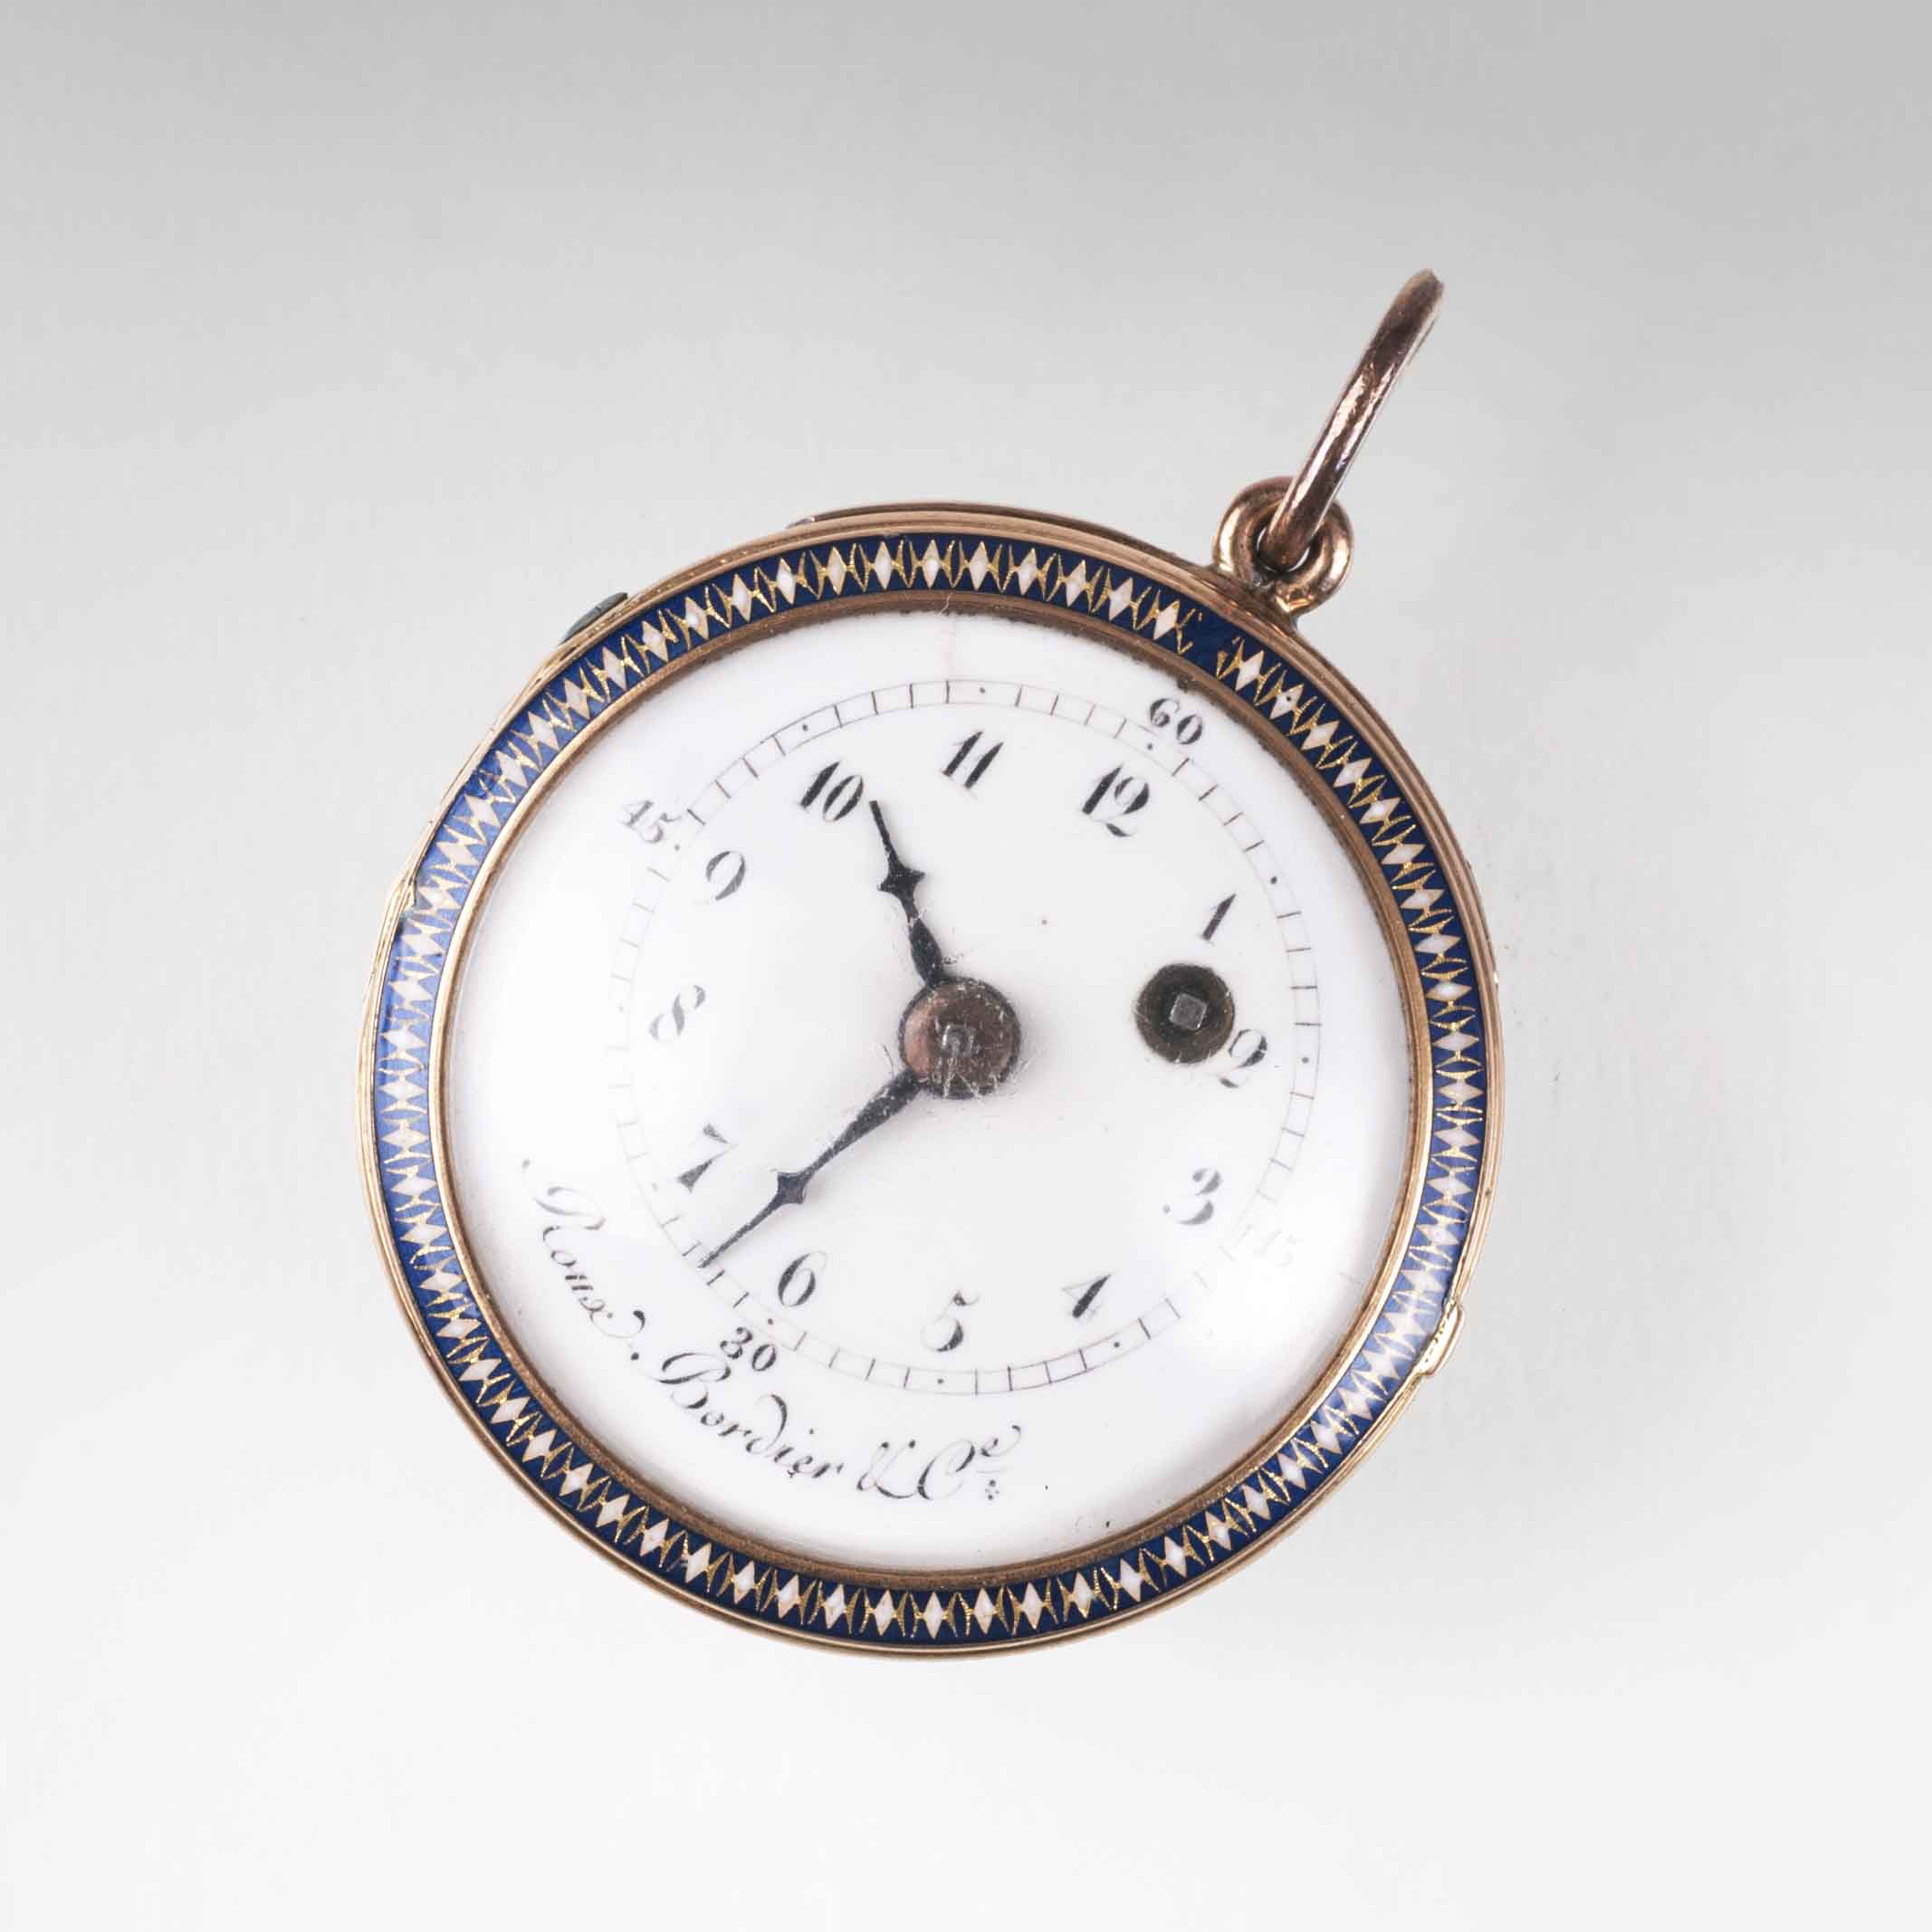 An Empire lady's pocket watch - image 3